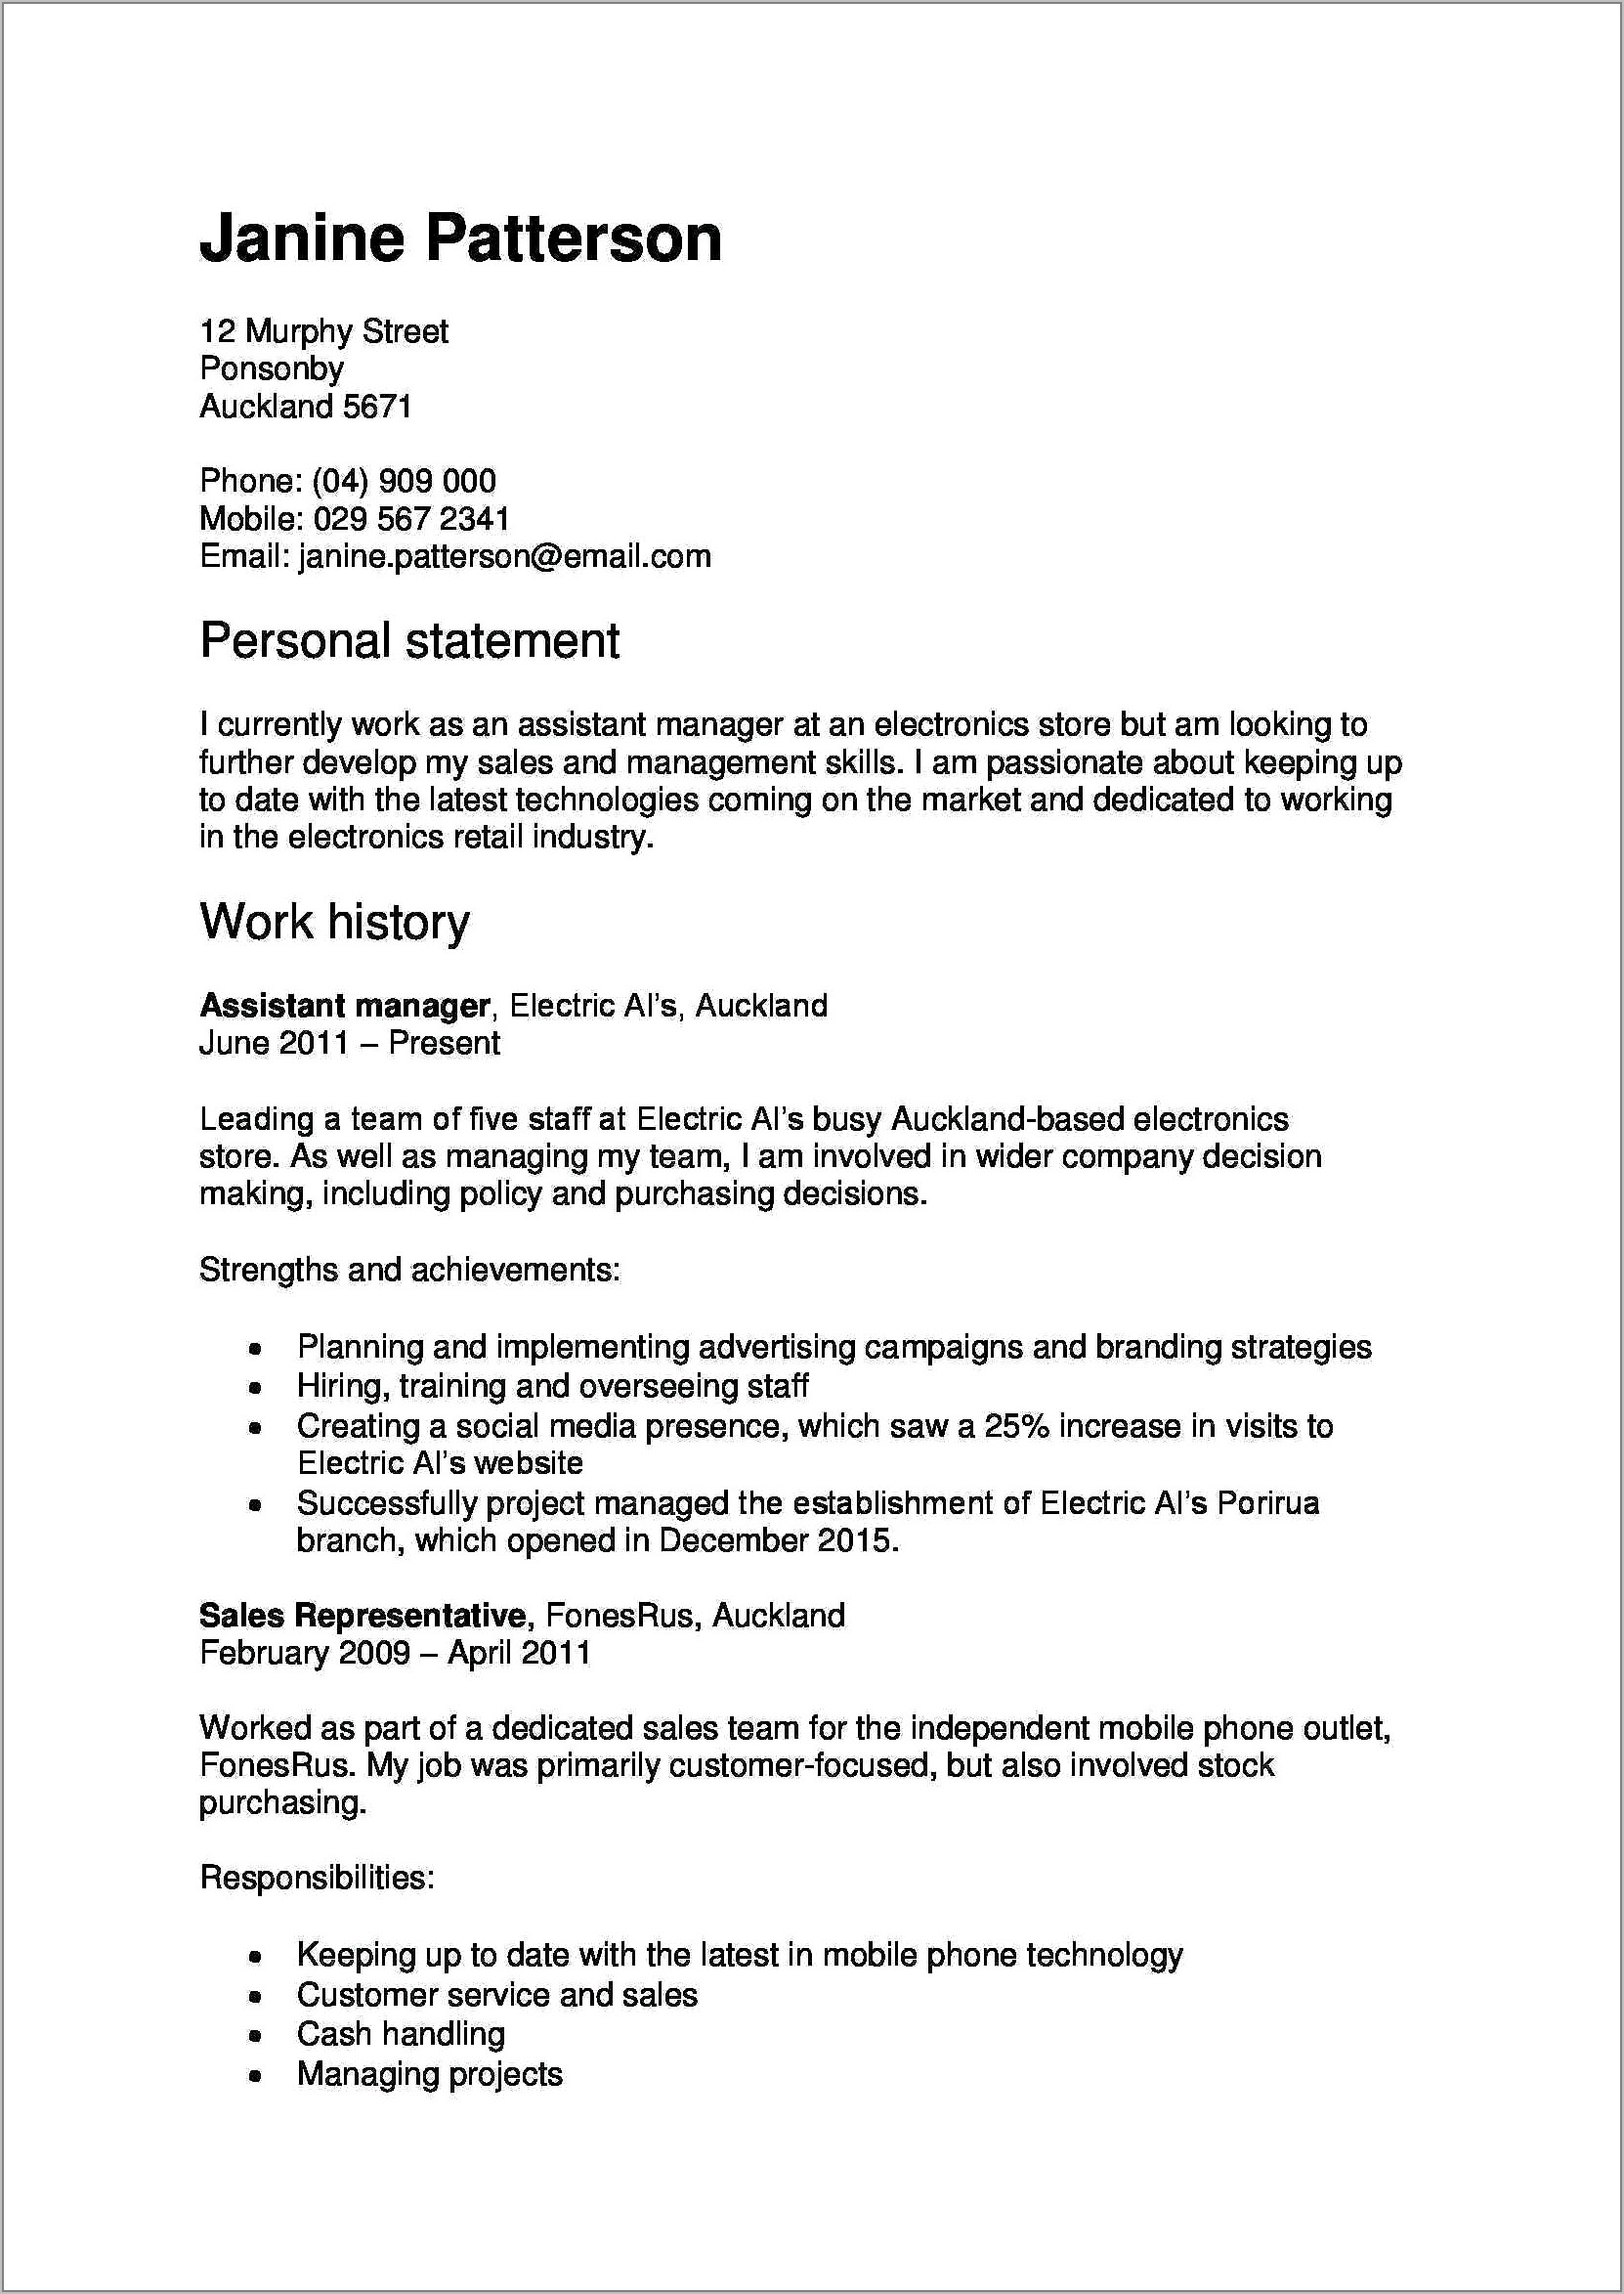 Free Printable Medical Assistant Resume